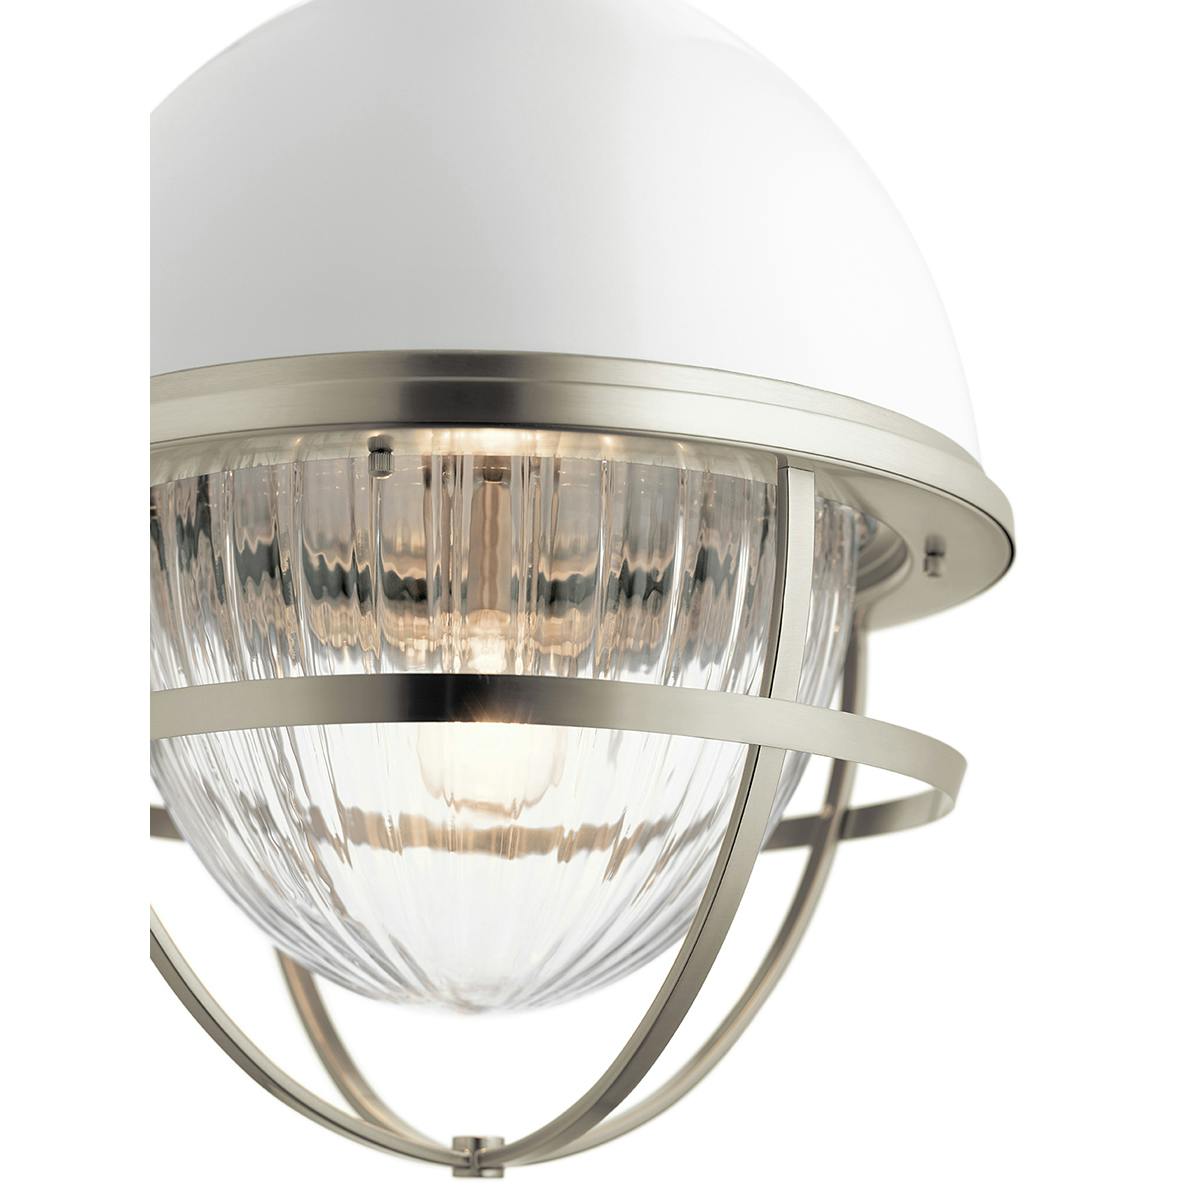 Close up view of the Tollis 23.75" Foyer Pendant Nickel on a white background